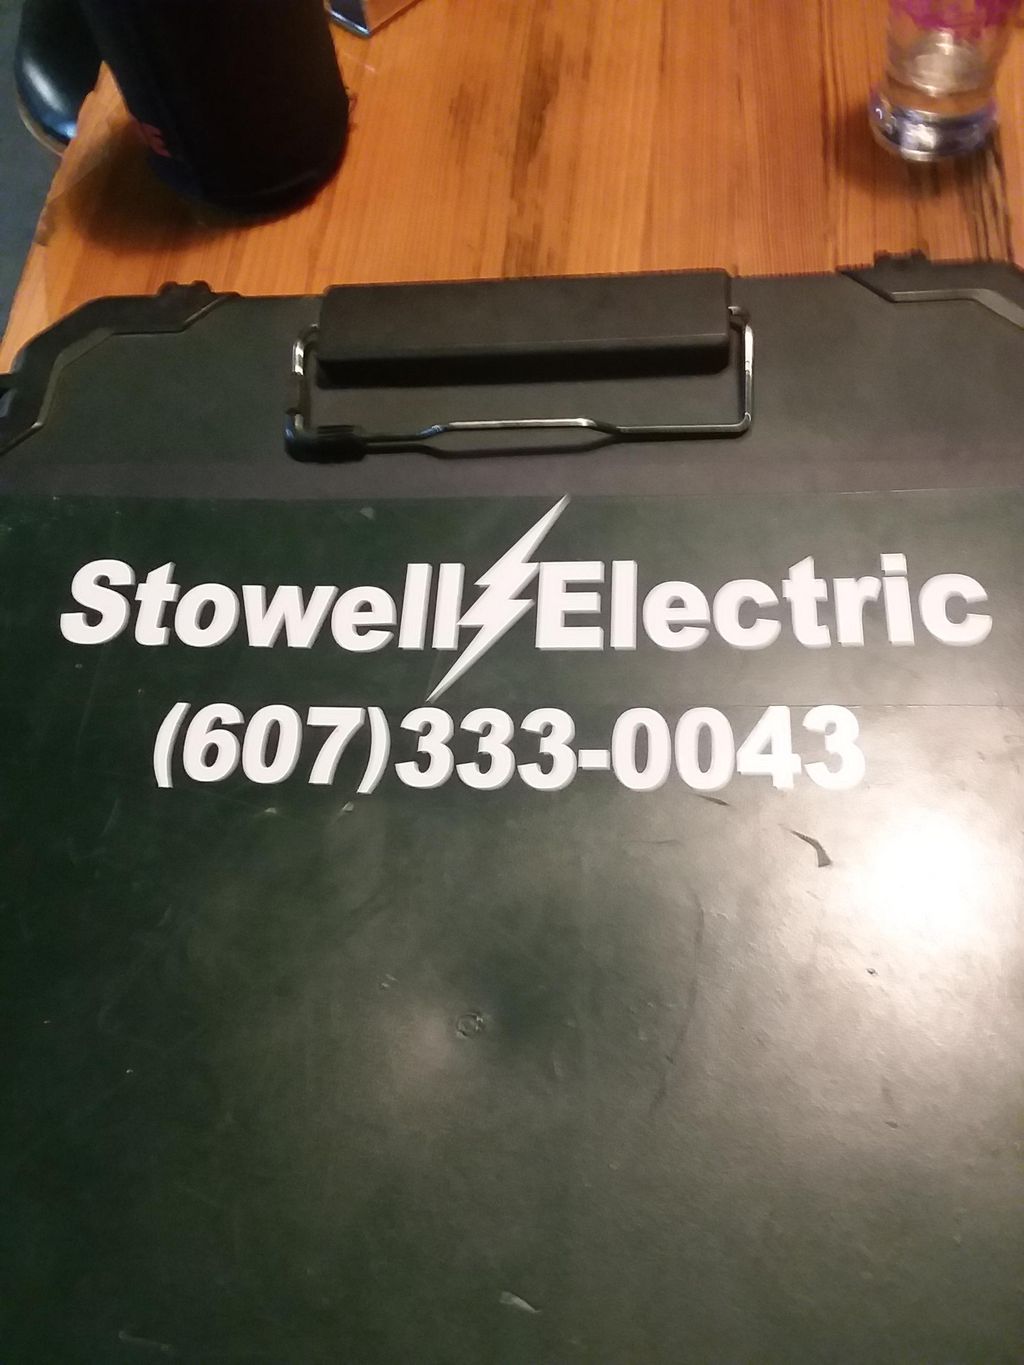 Stowell electric